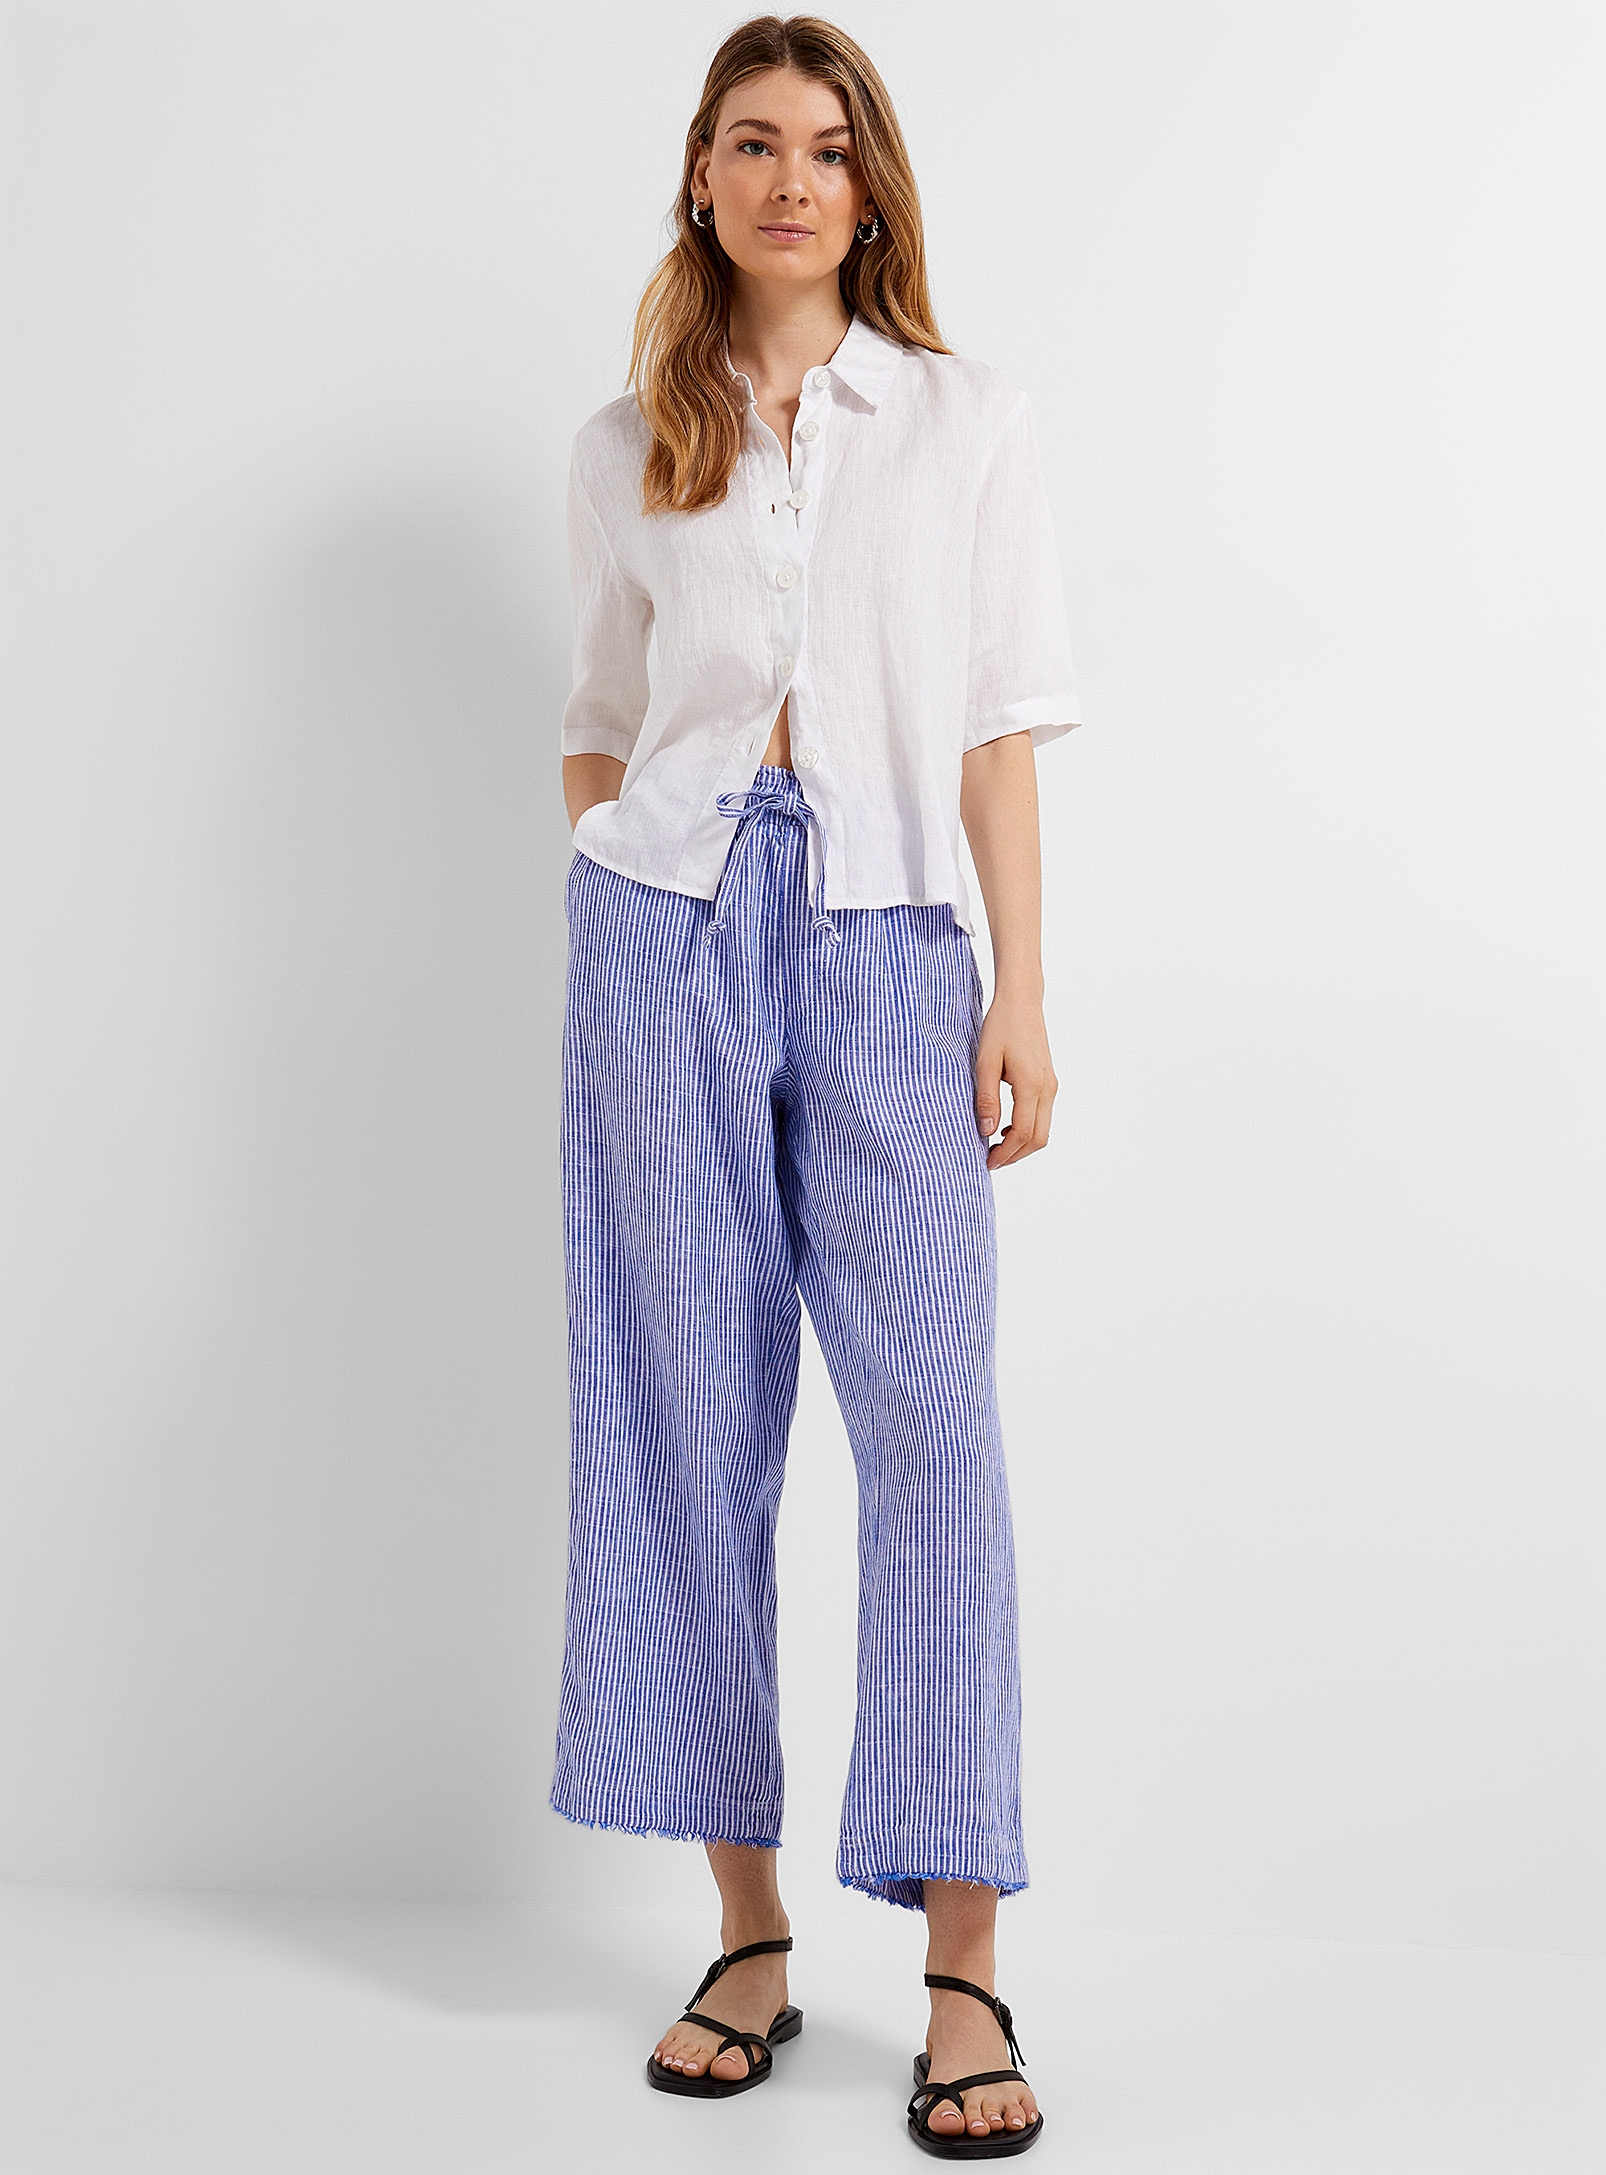 Melissa Nepton Frayed Edging Nautical Stripes Linen Pant In Patterned Blue